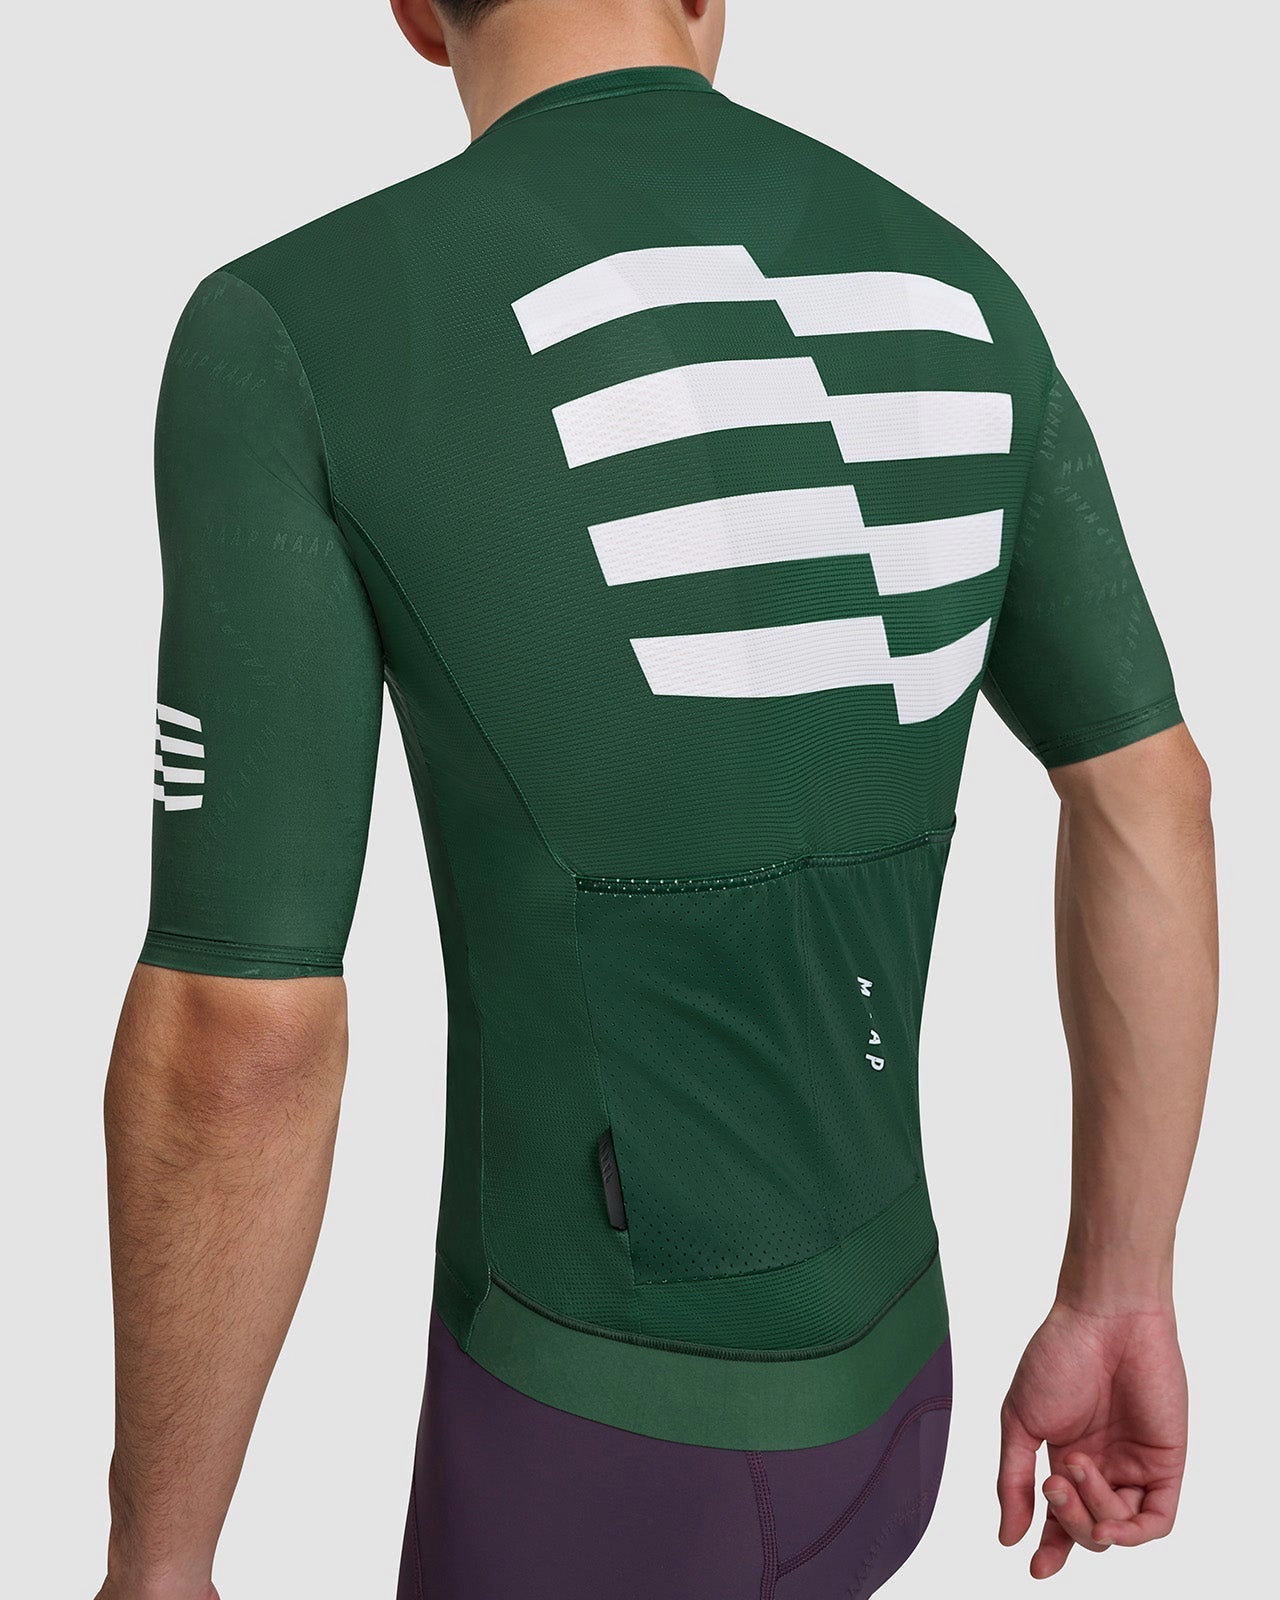 MAAP Maillot Sphere Pro Hex Jersey 2.0